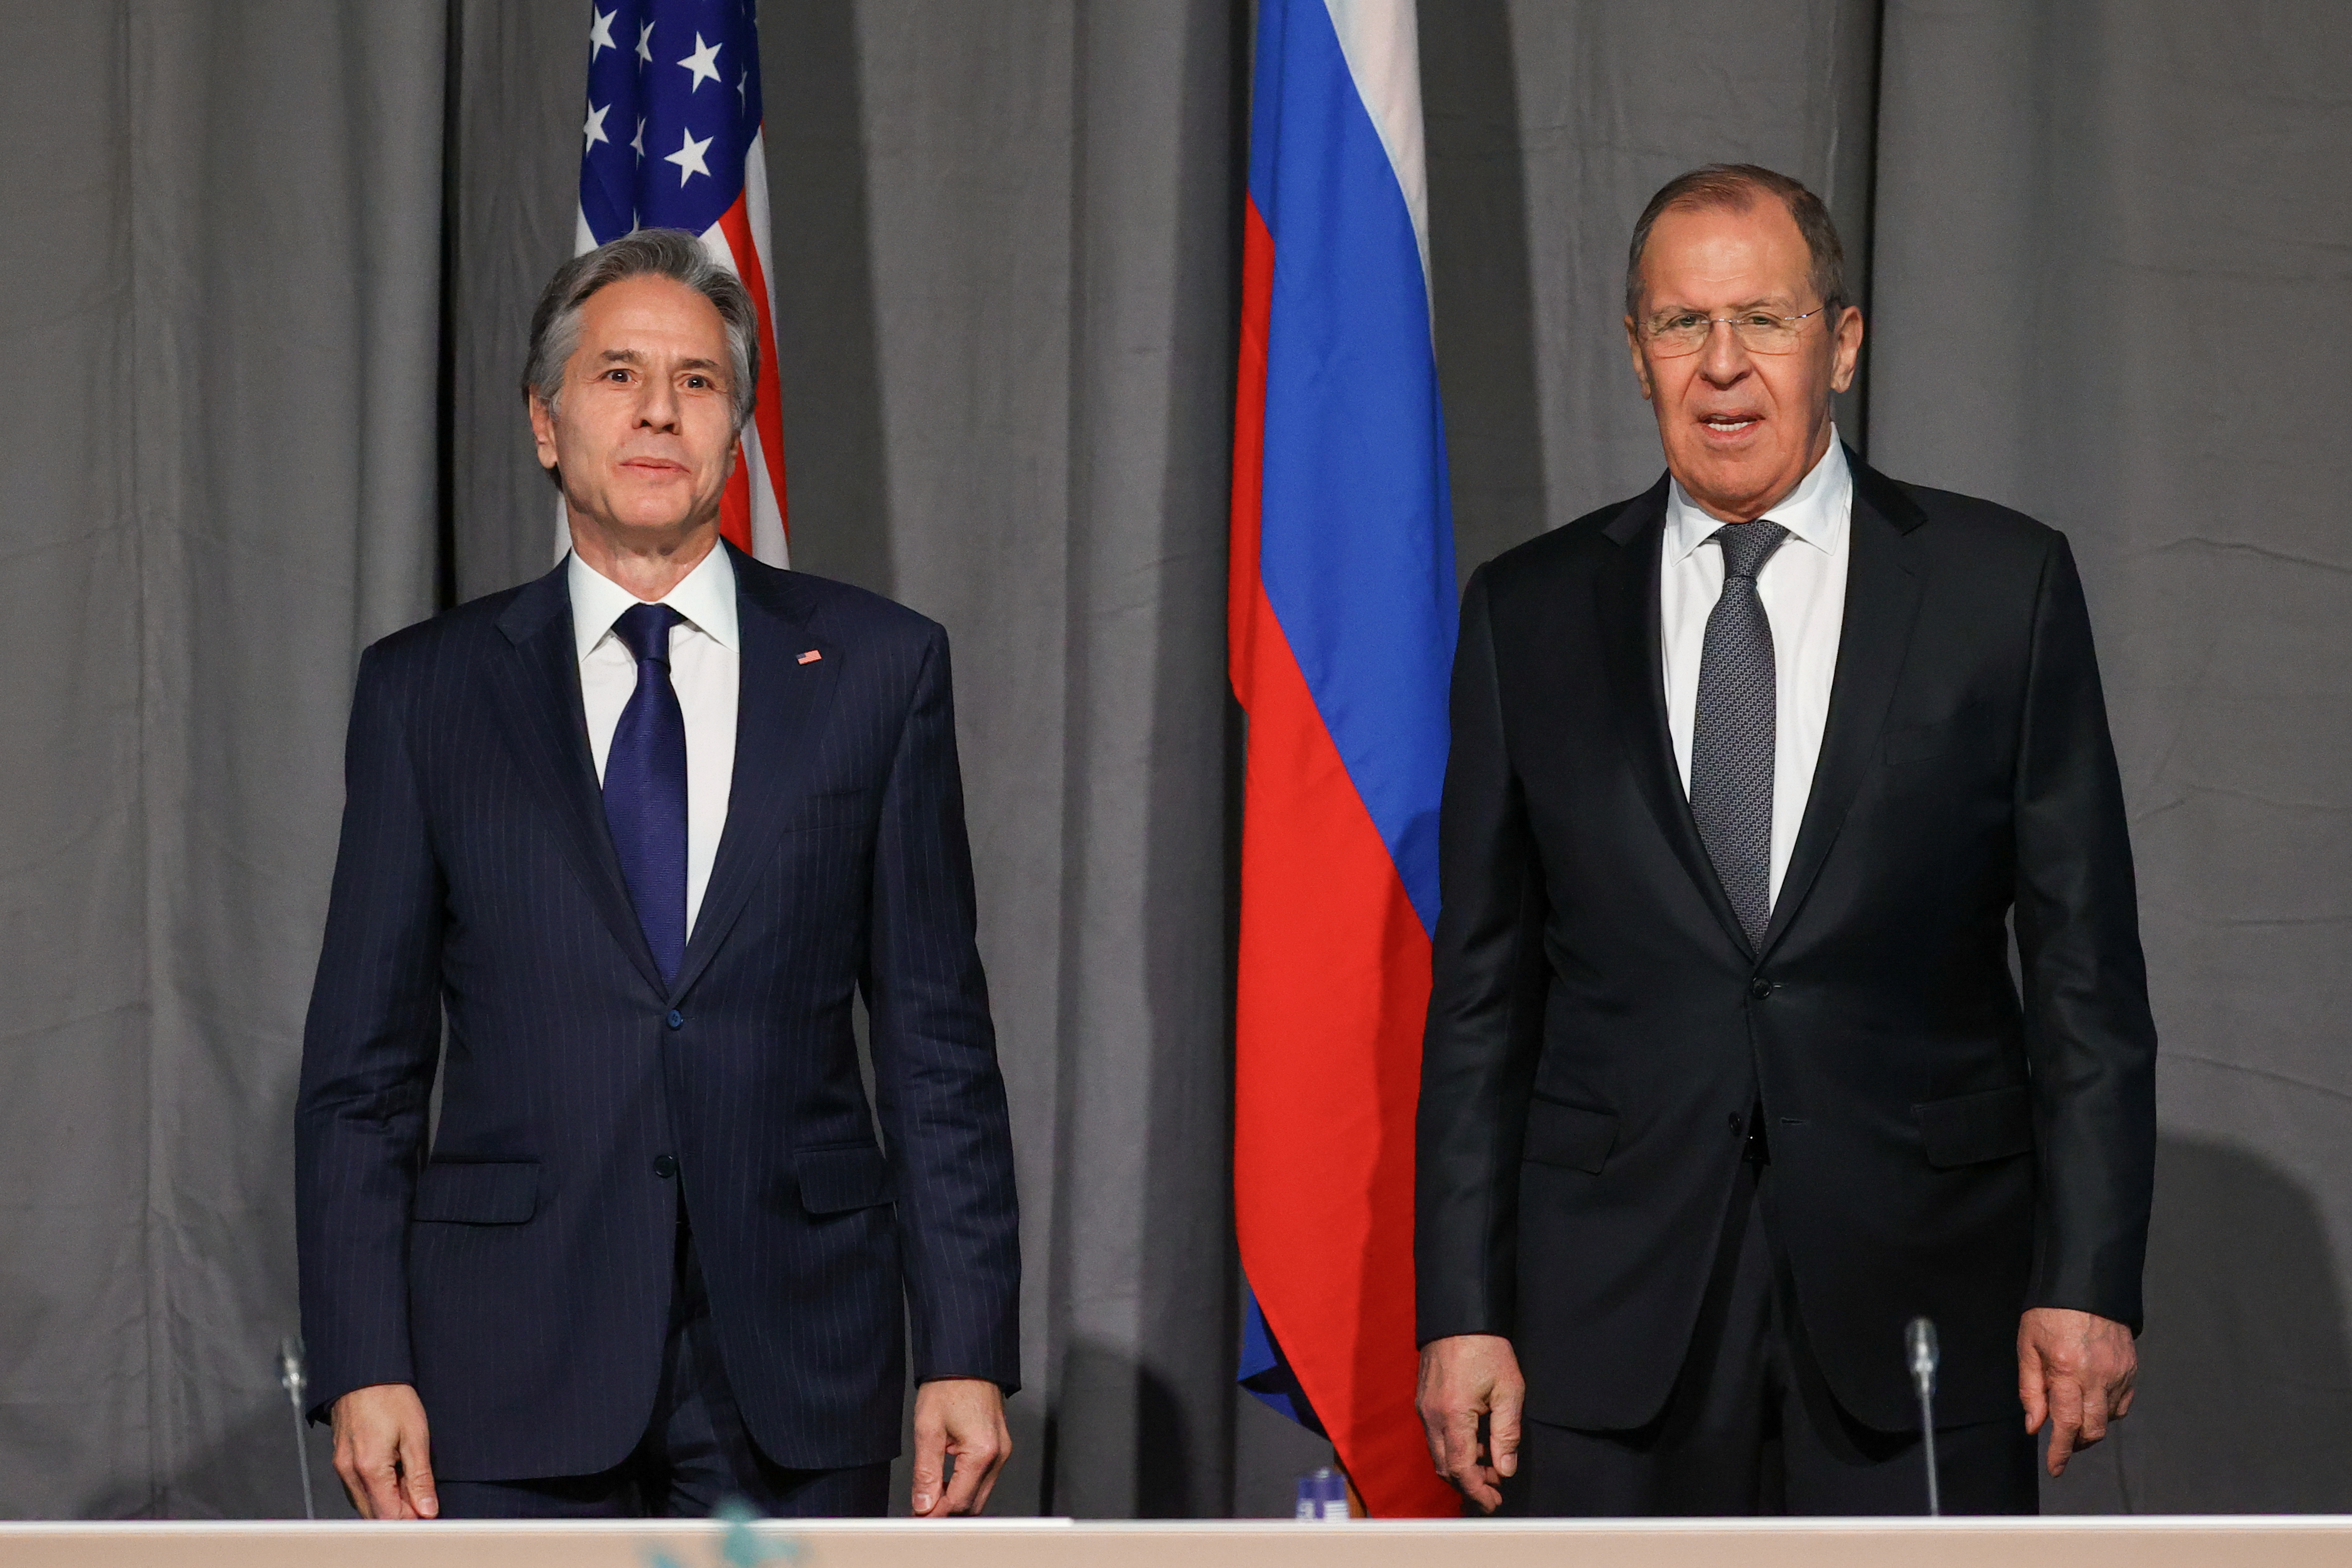 Russian Foreign Minister Lavrov meets with U.S. Secretary of State Blinken in Stockholm